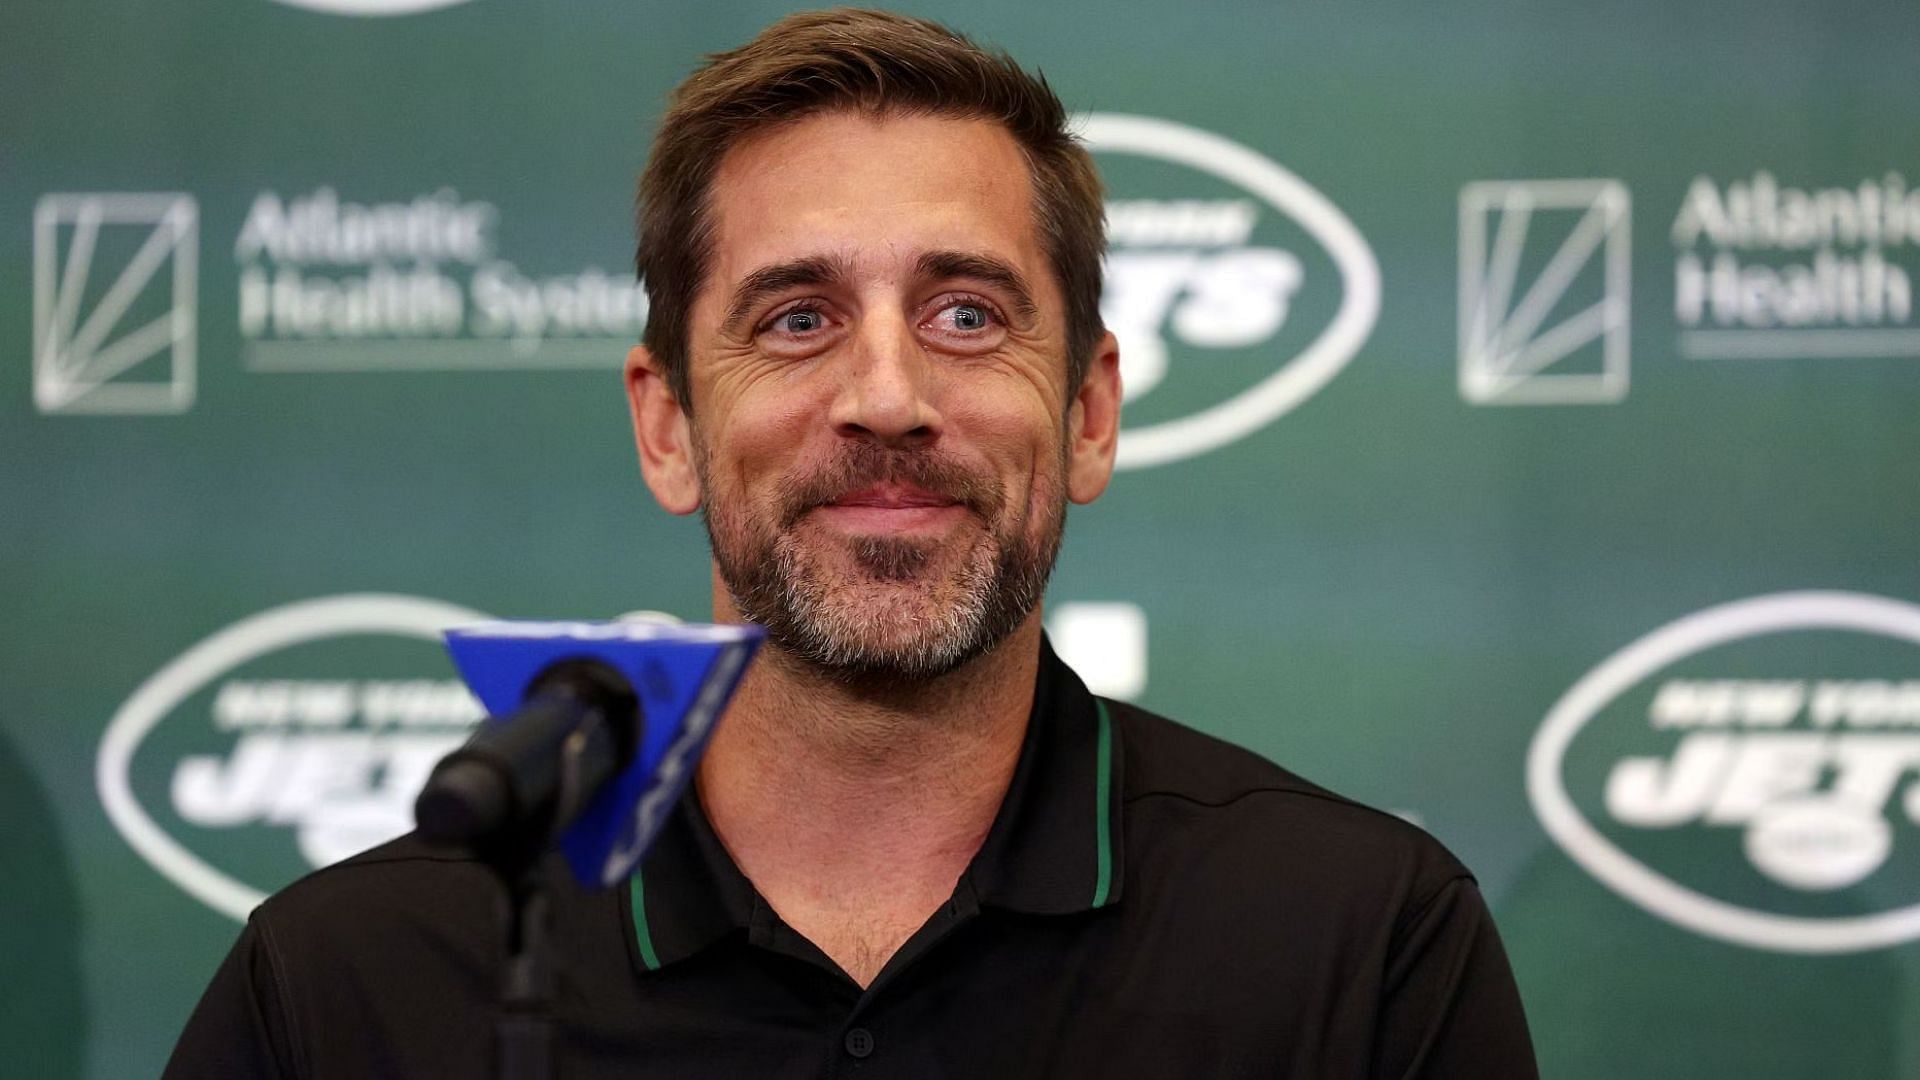 Aaron Rodgers at his introductory press conference with the New York Jets.